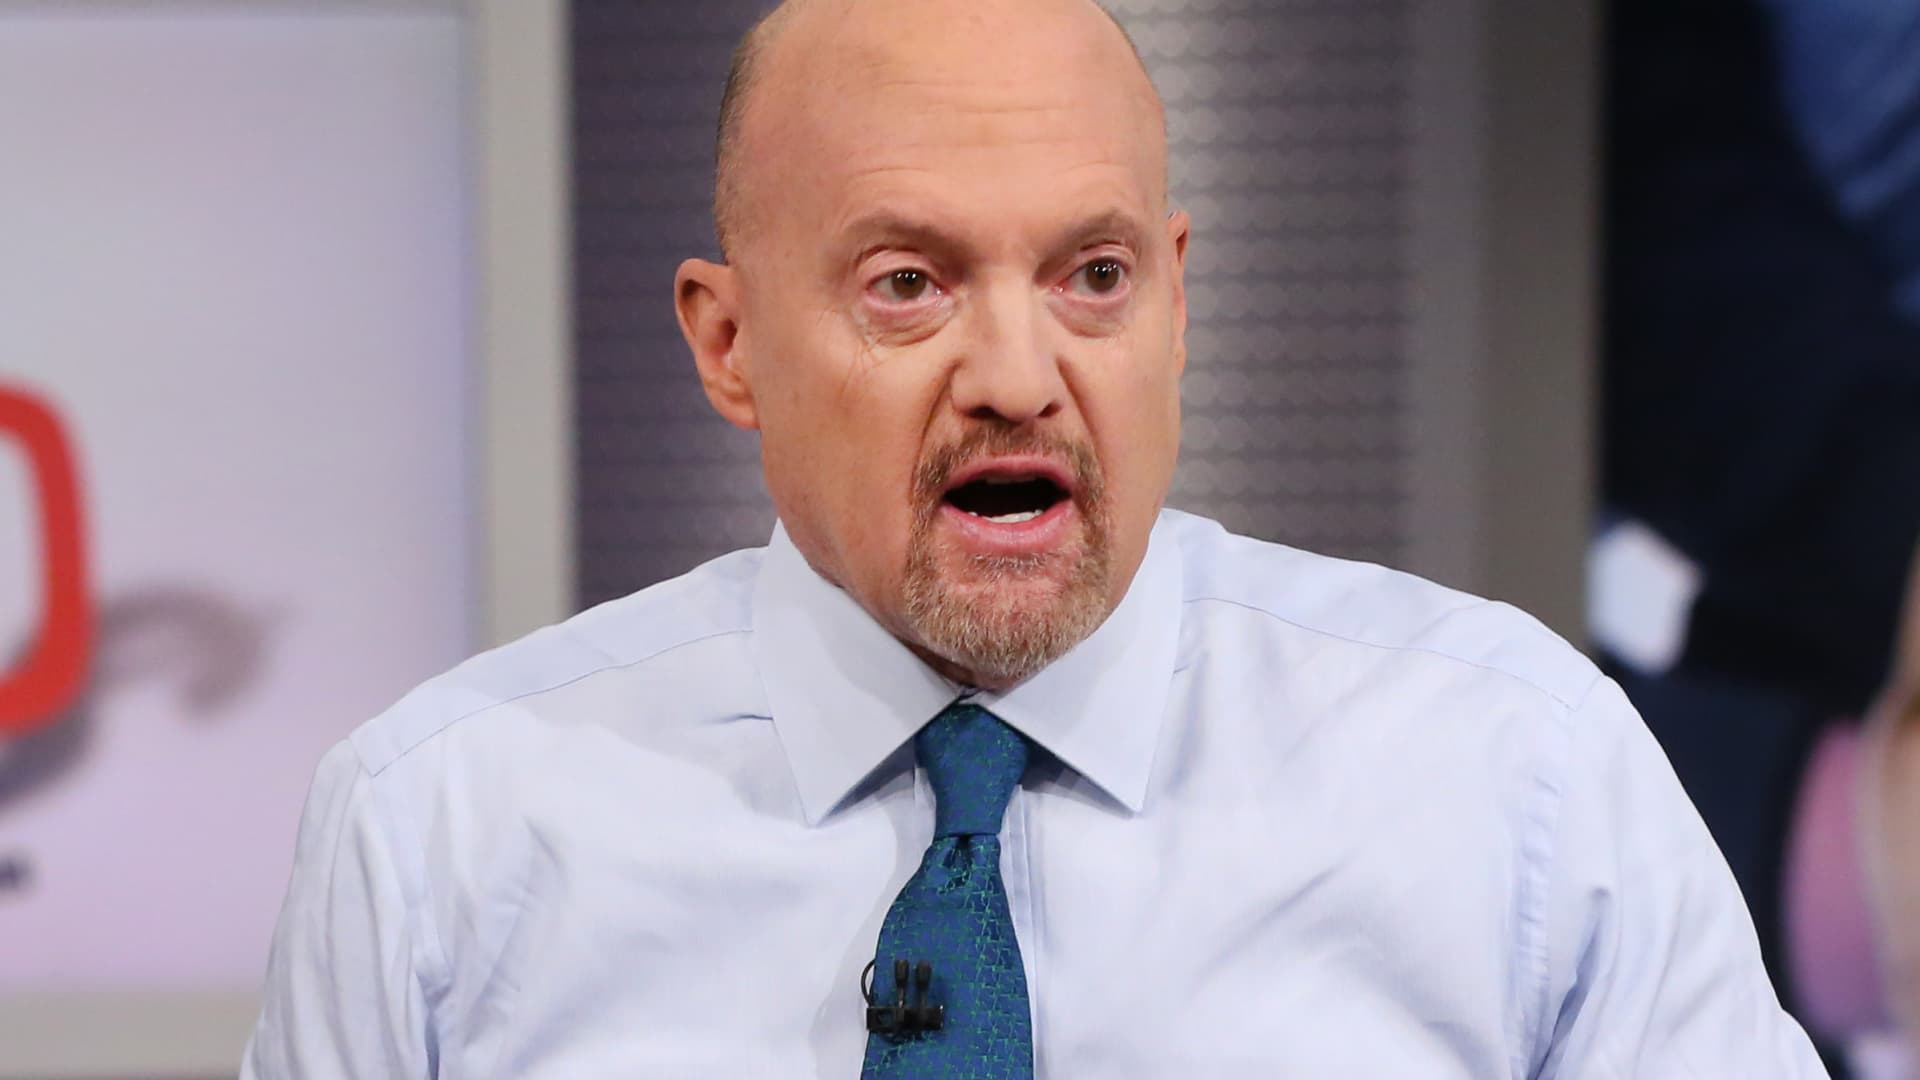 Jim Cramer says the economy is stabilizing and can avoid a recession - CNBC (Picture 1)